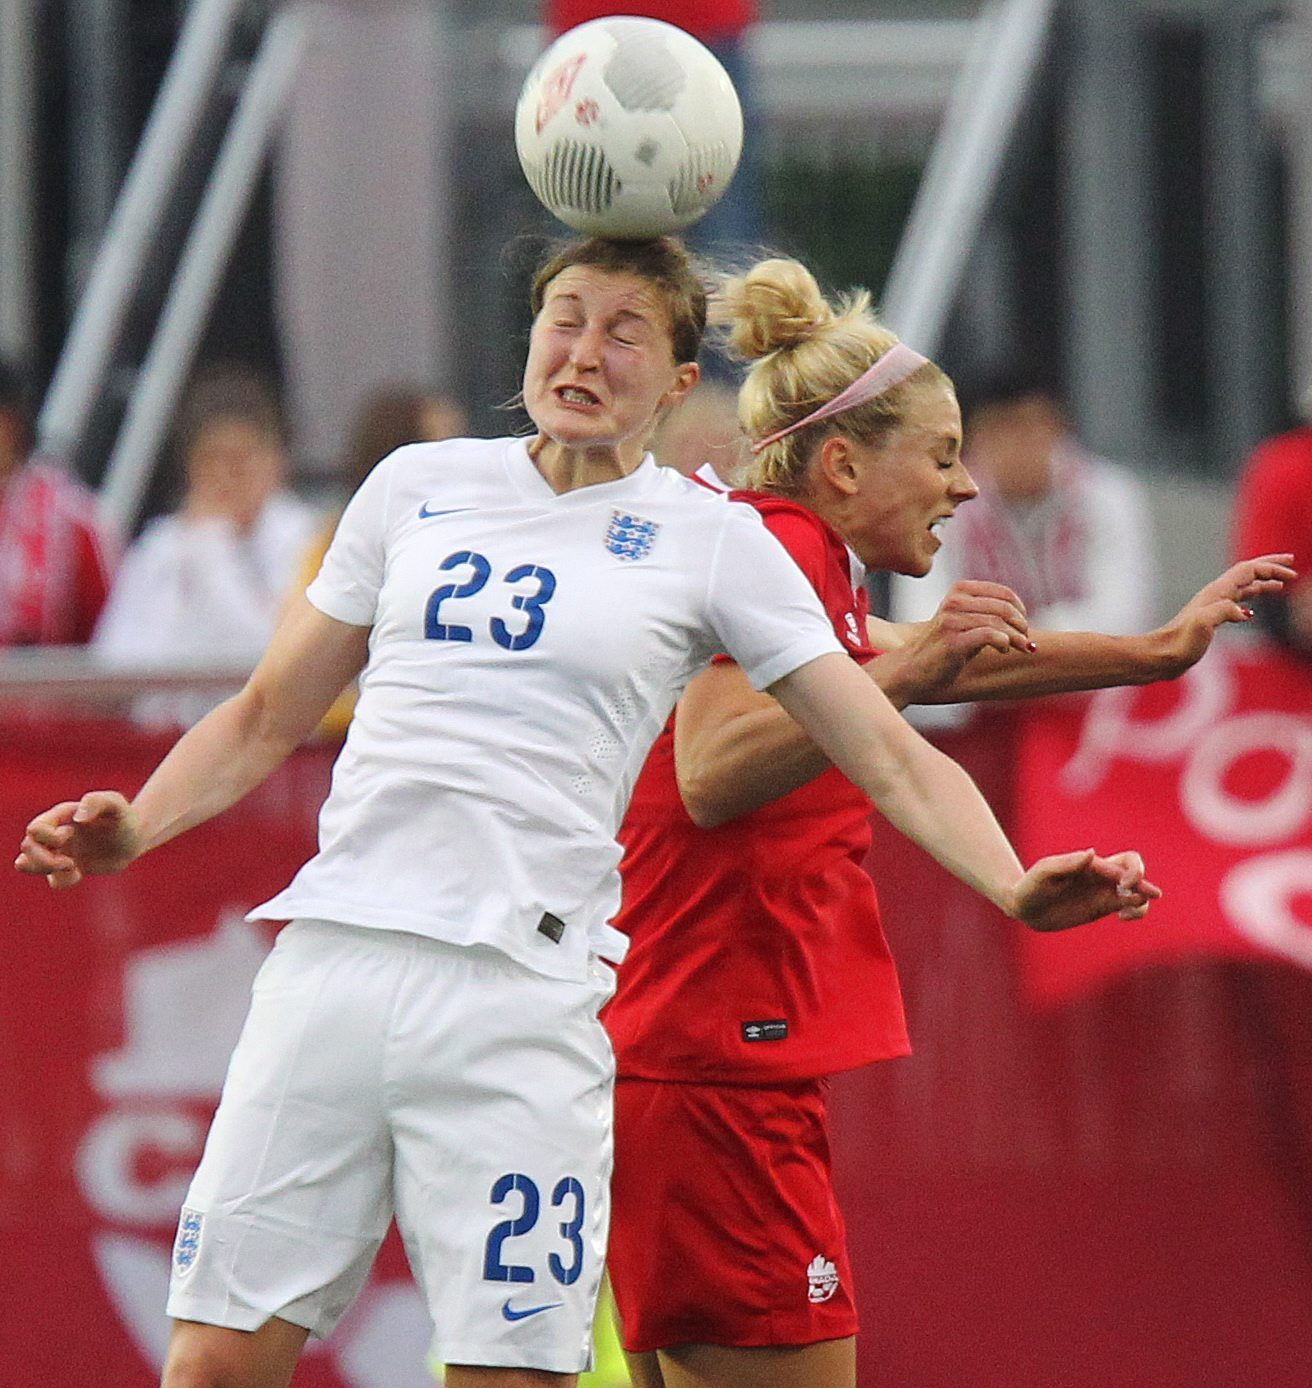 Englands Ellen White, left, heads the ball in front of Canadas Lauren Sesselmann during a womens international soccer friendly match in Hamilton, Ontario, Canada on Friday May 29, 2015. (Dave Chidley/The Canadian Press via AP) 